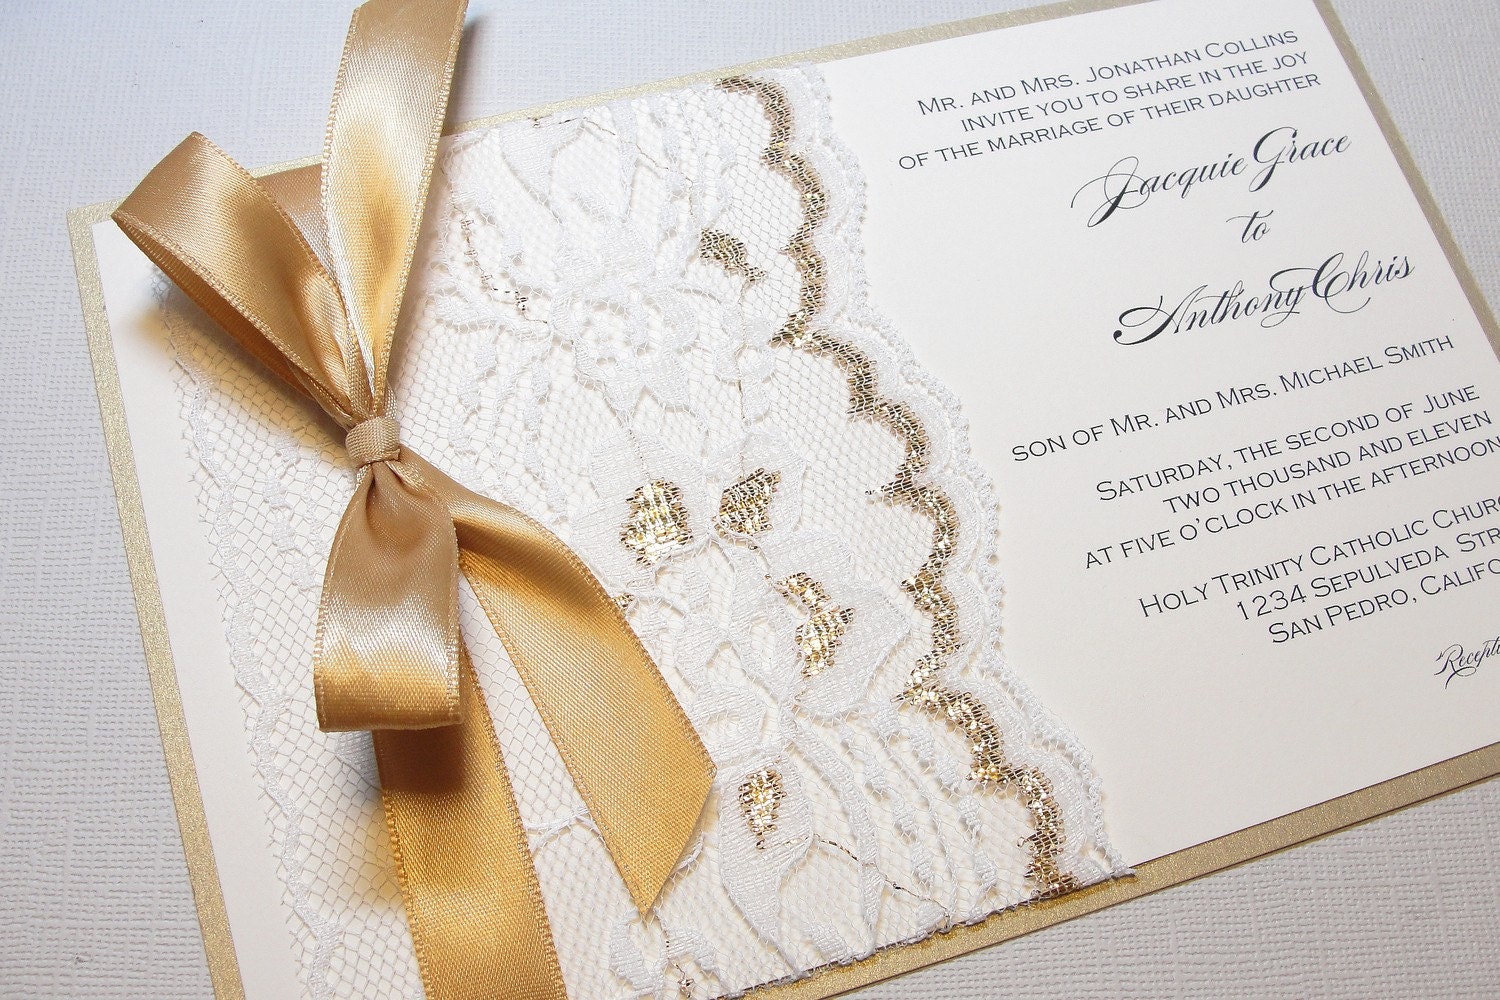 Lace Wrapped Wedding Reception Invitations, Wedding Invites, Wedding Invitations, Sample, by ohsosweetprints on Etsy